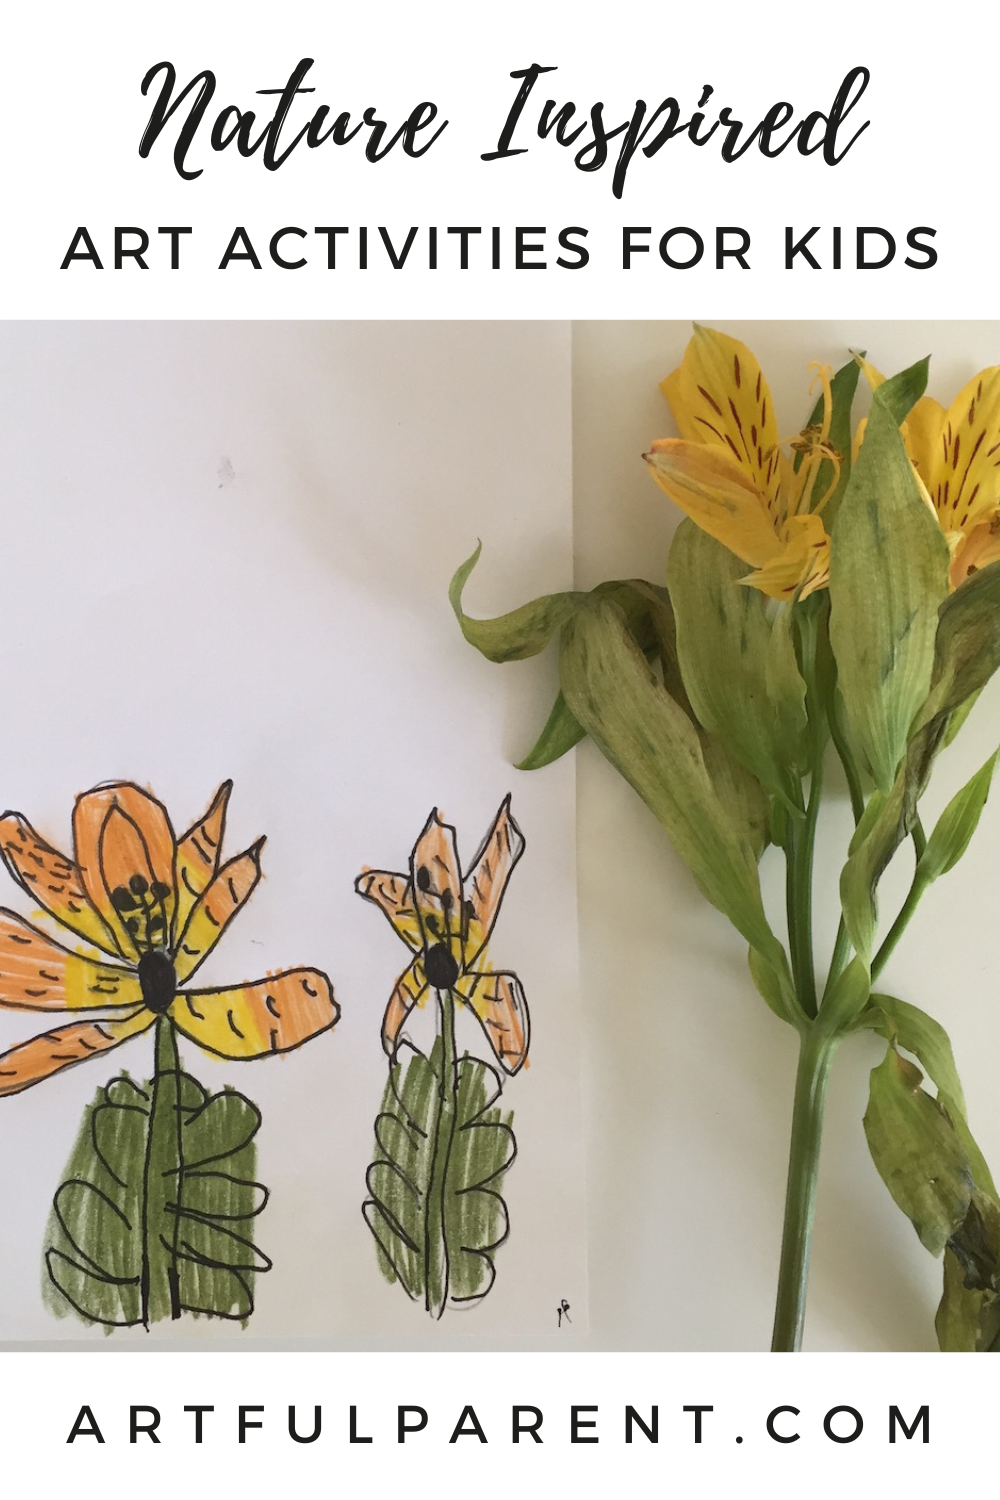 Two Nature Inspired Art Activities for Kids